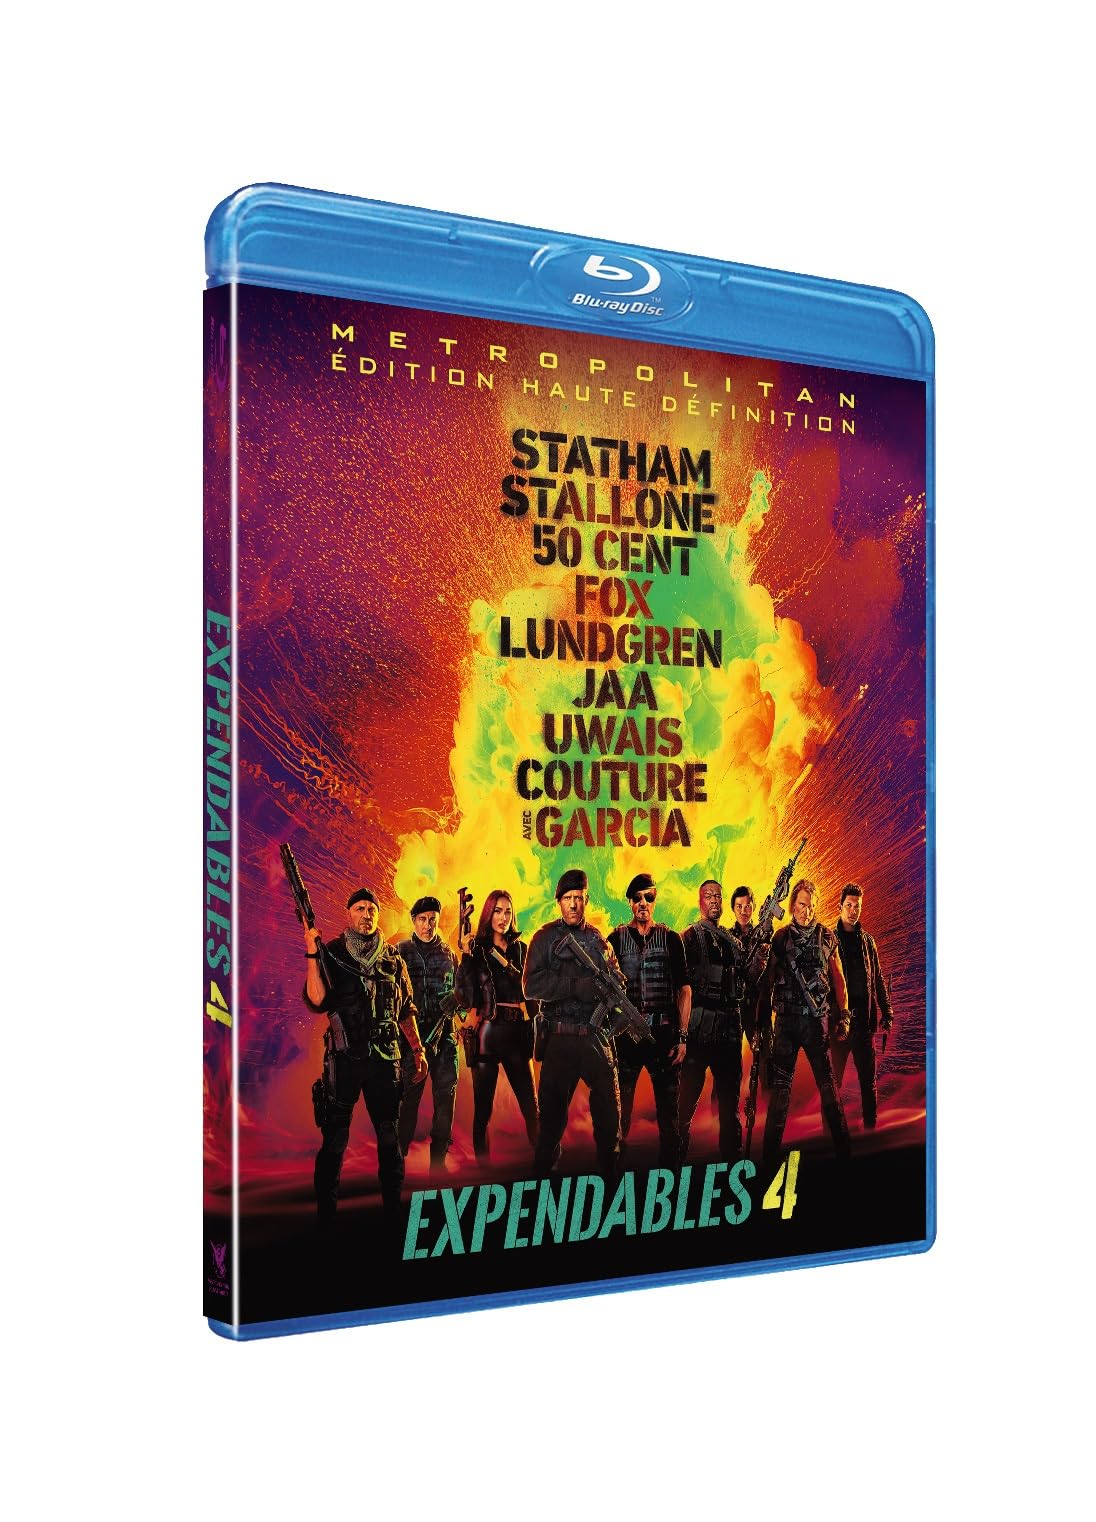 Achat Expendables 4 [Blu-Ray] lOiyk6hoW bien vendre